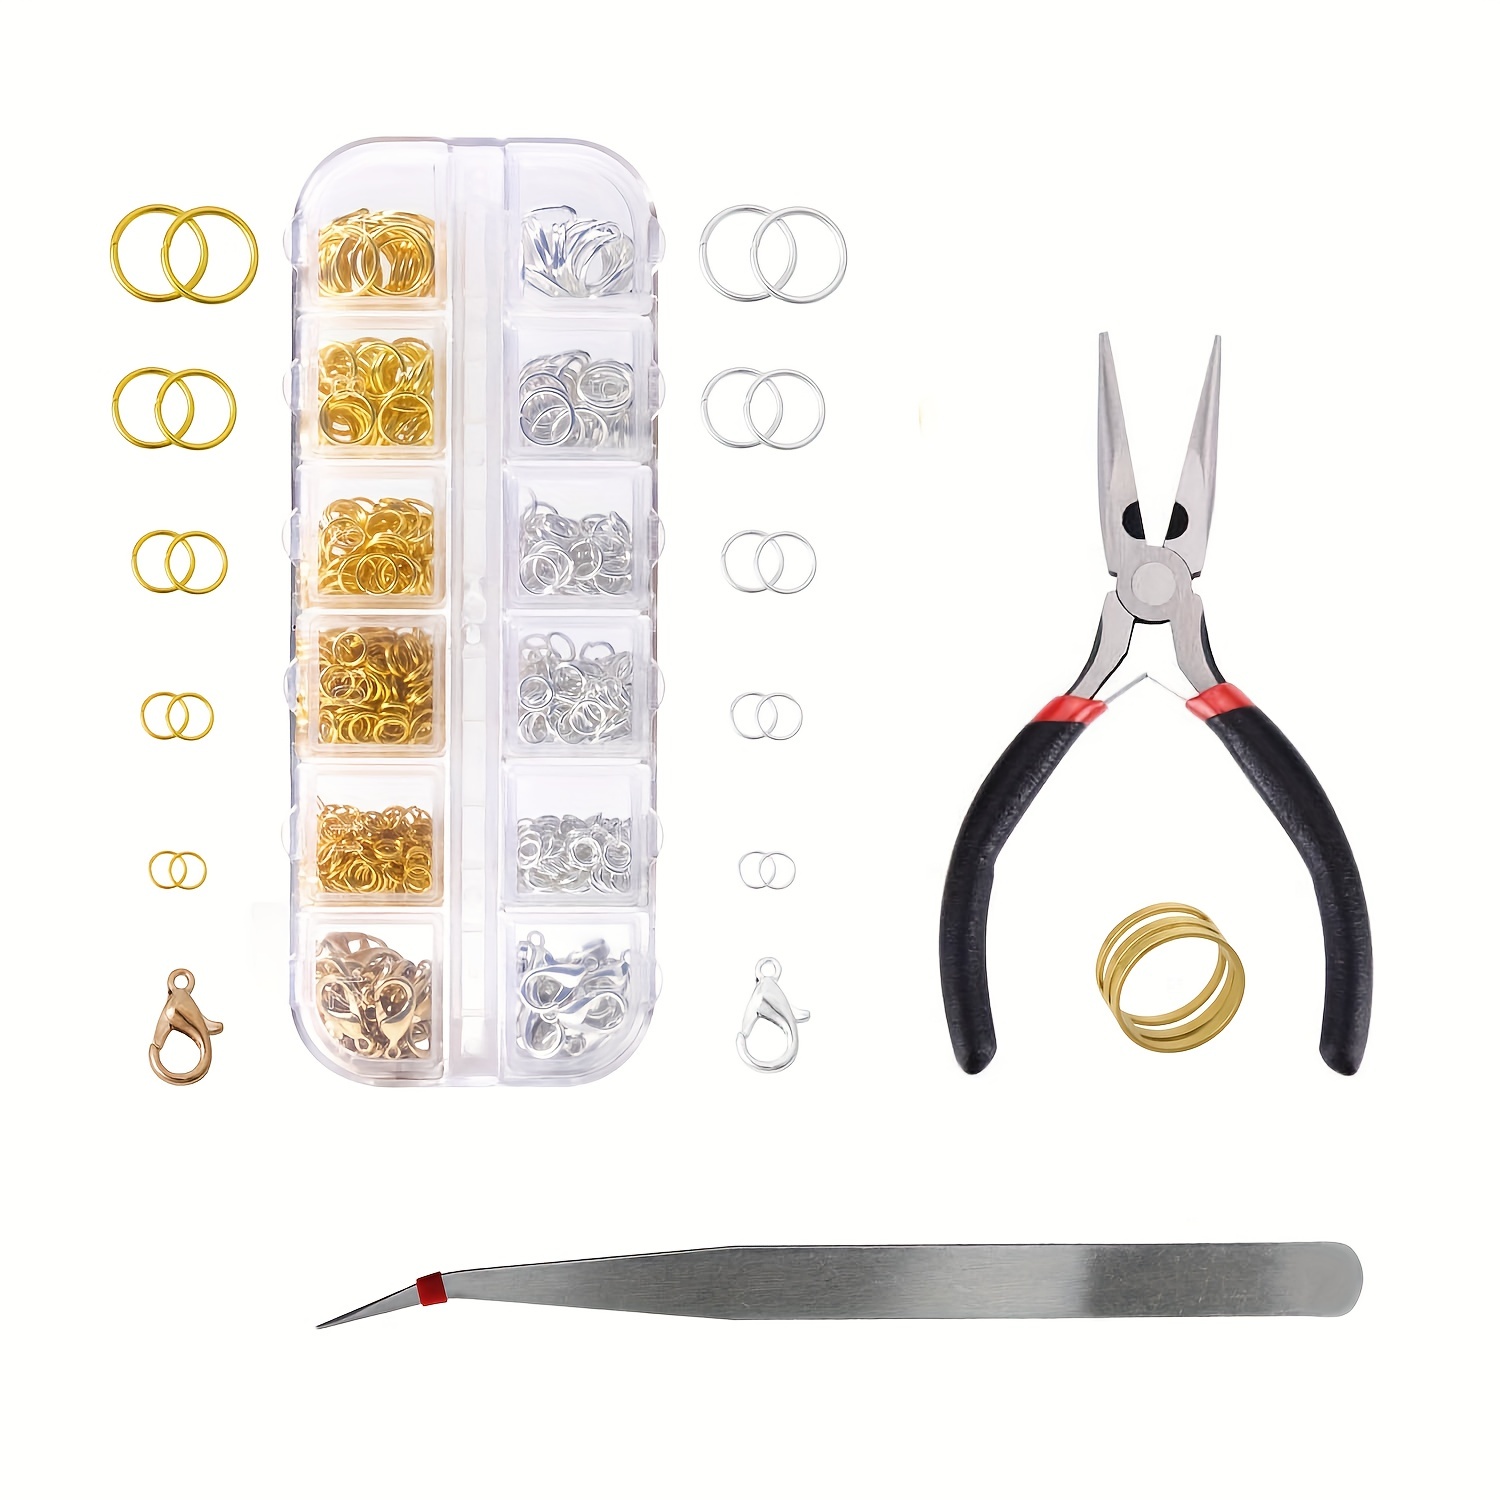 960pcs Wire Jewelry Making Kit Plier Repair Tools DIY Craft Supplies  Starter Set Lobster Clasp Necklaces, Bracelets, Earrings Jewelry Crafts 